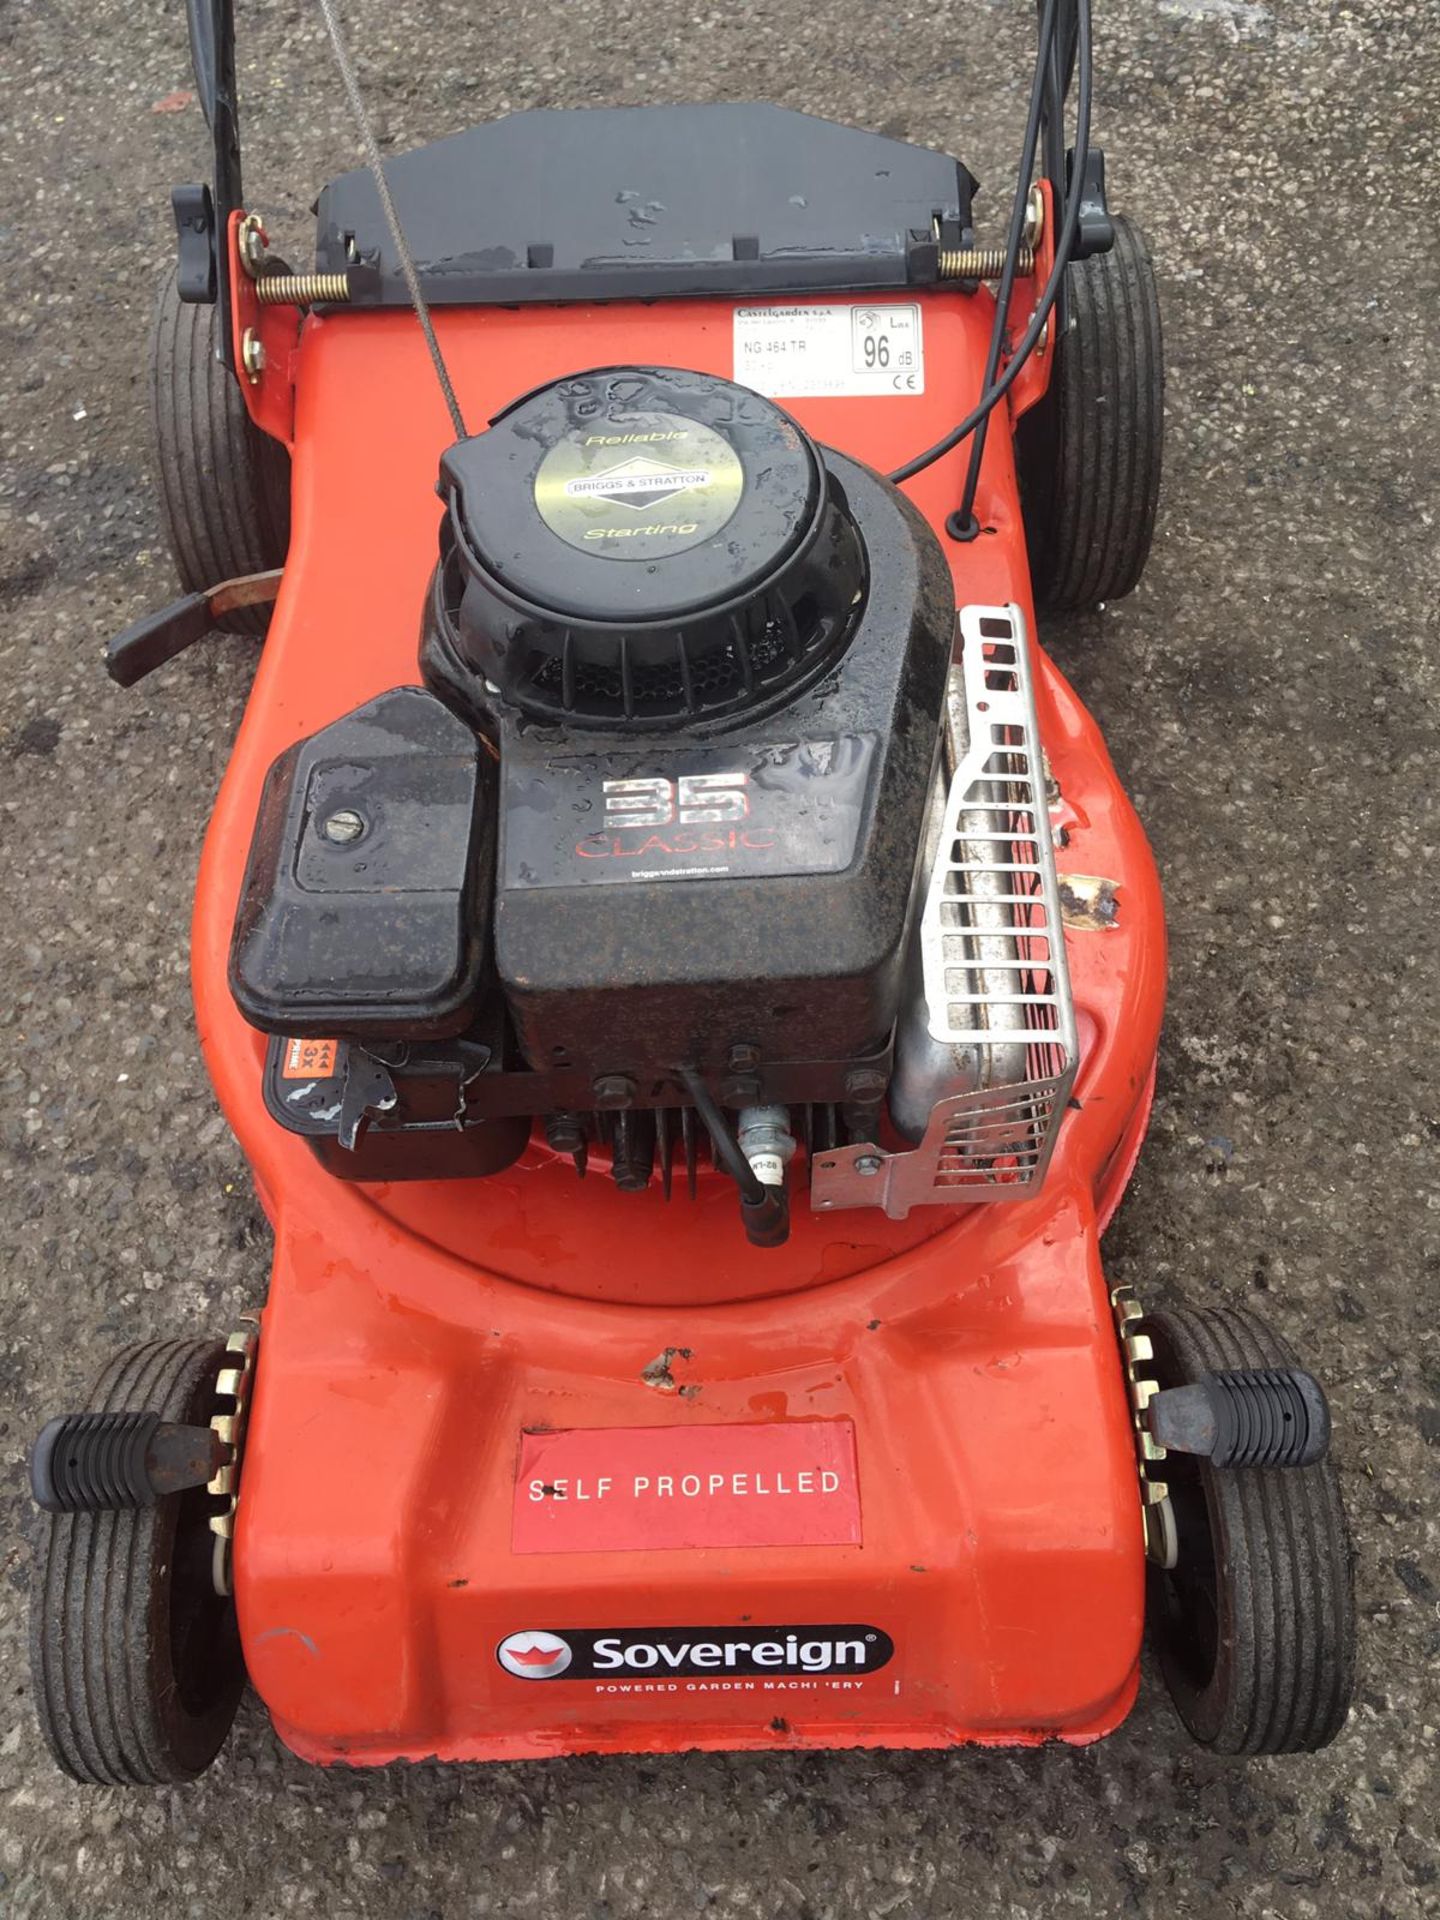 4 X WALK BEHIND PUSH MOWERS ALL SOLD AS ONE LOT - NO RESERVE! *NO VAT* - Image 16 of 16